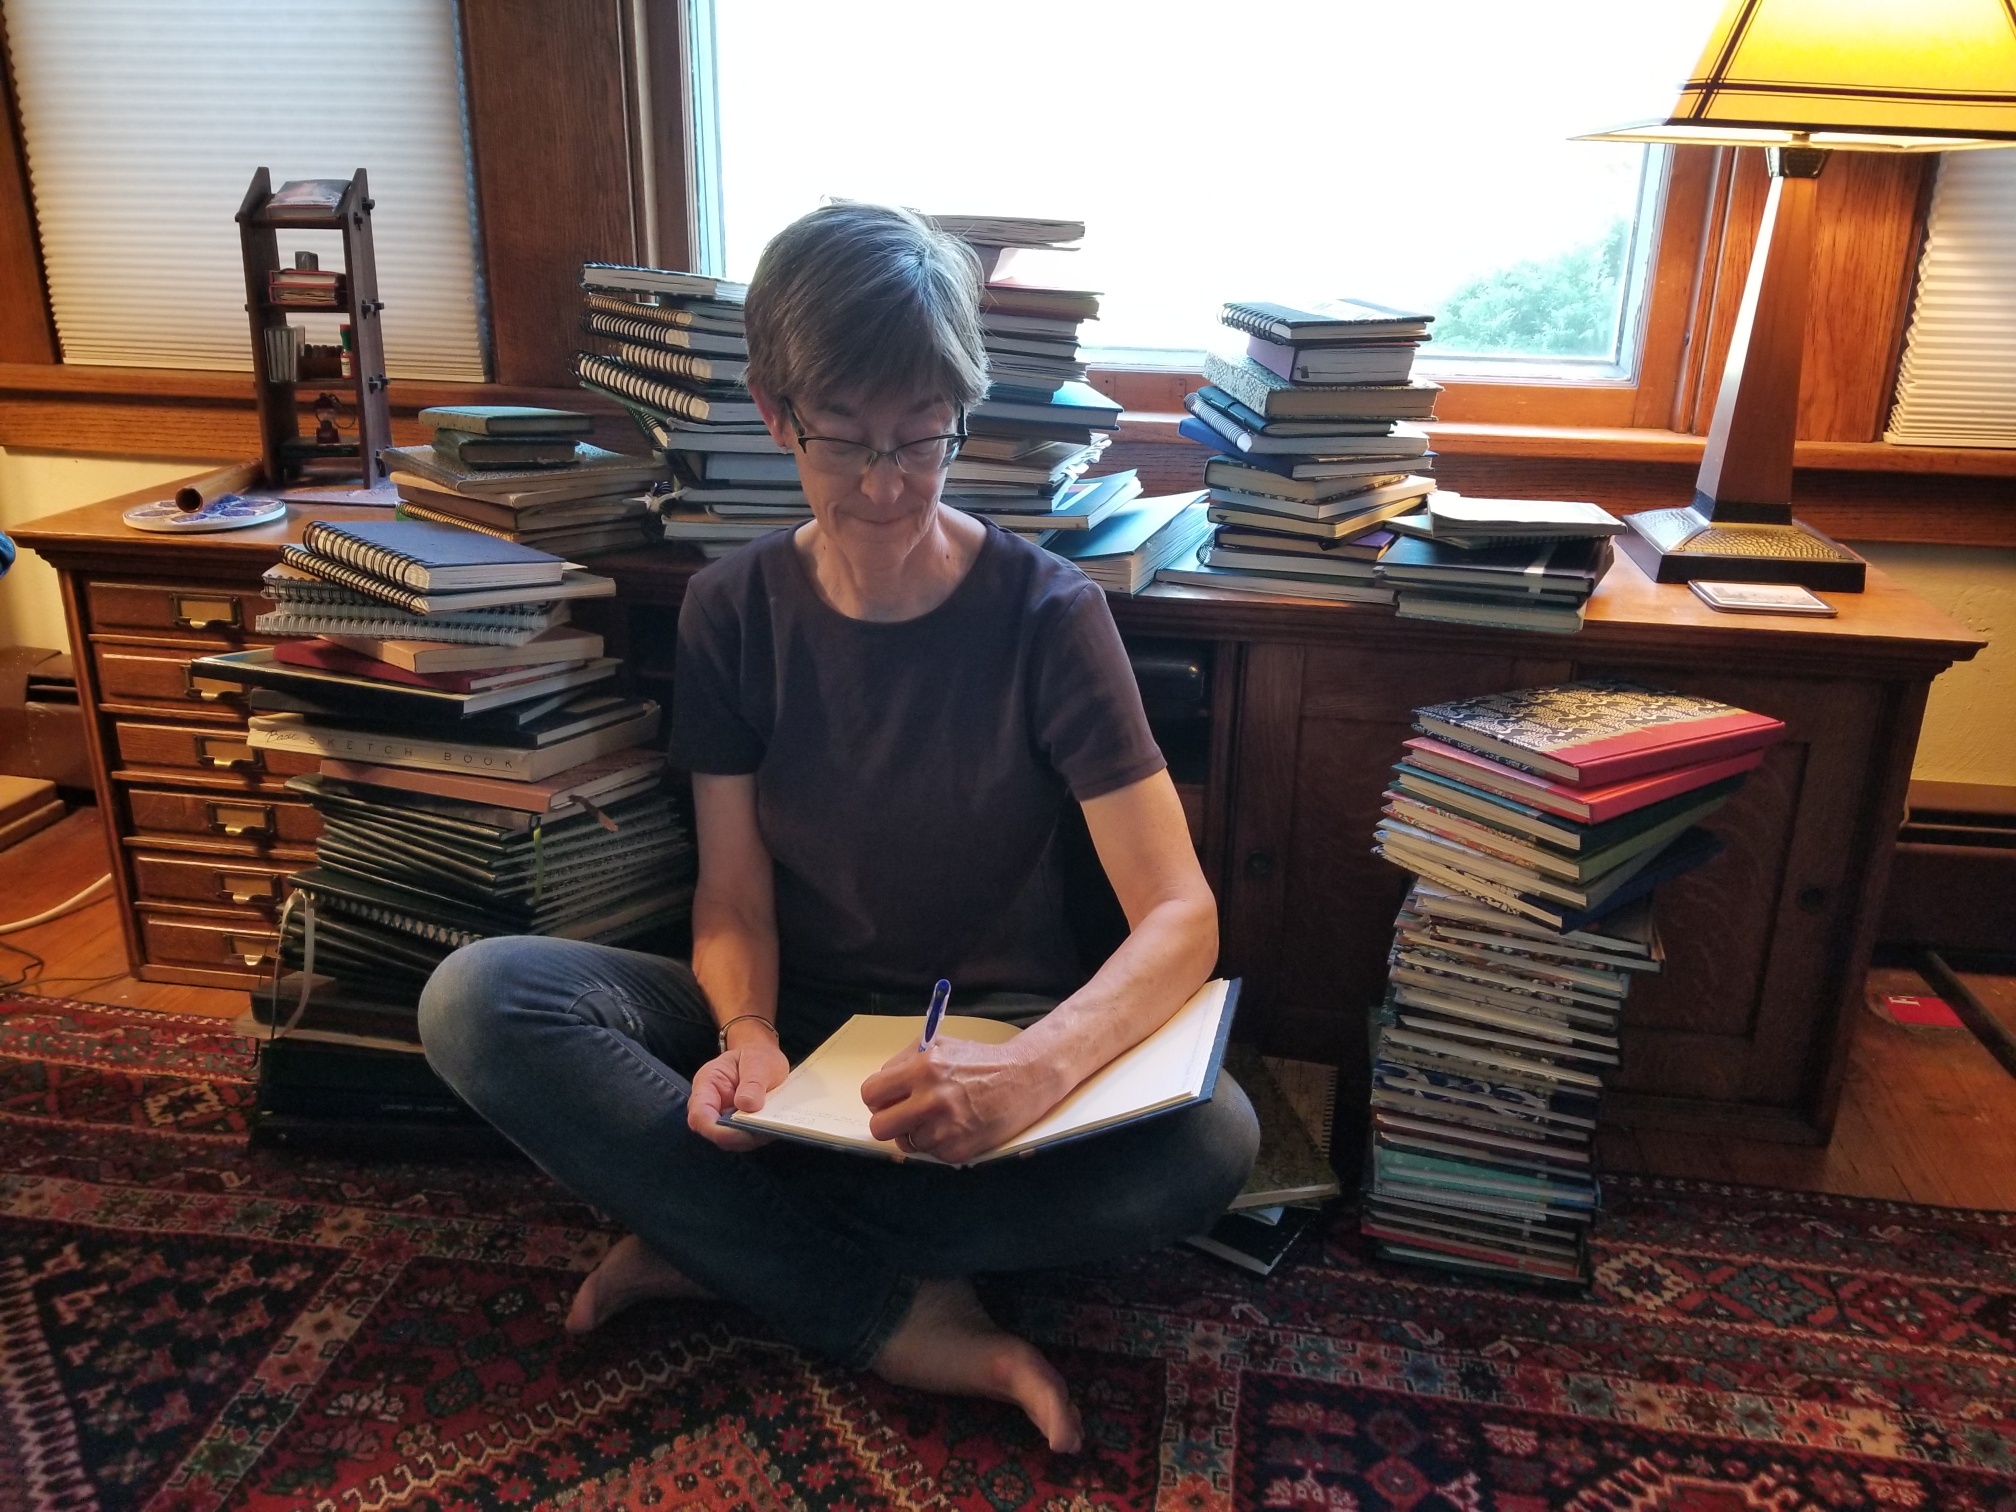 Paula Vene Smith Of Grinnell College: How Journaling Helped Me Be More Calm, Mindful And Resilient